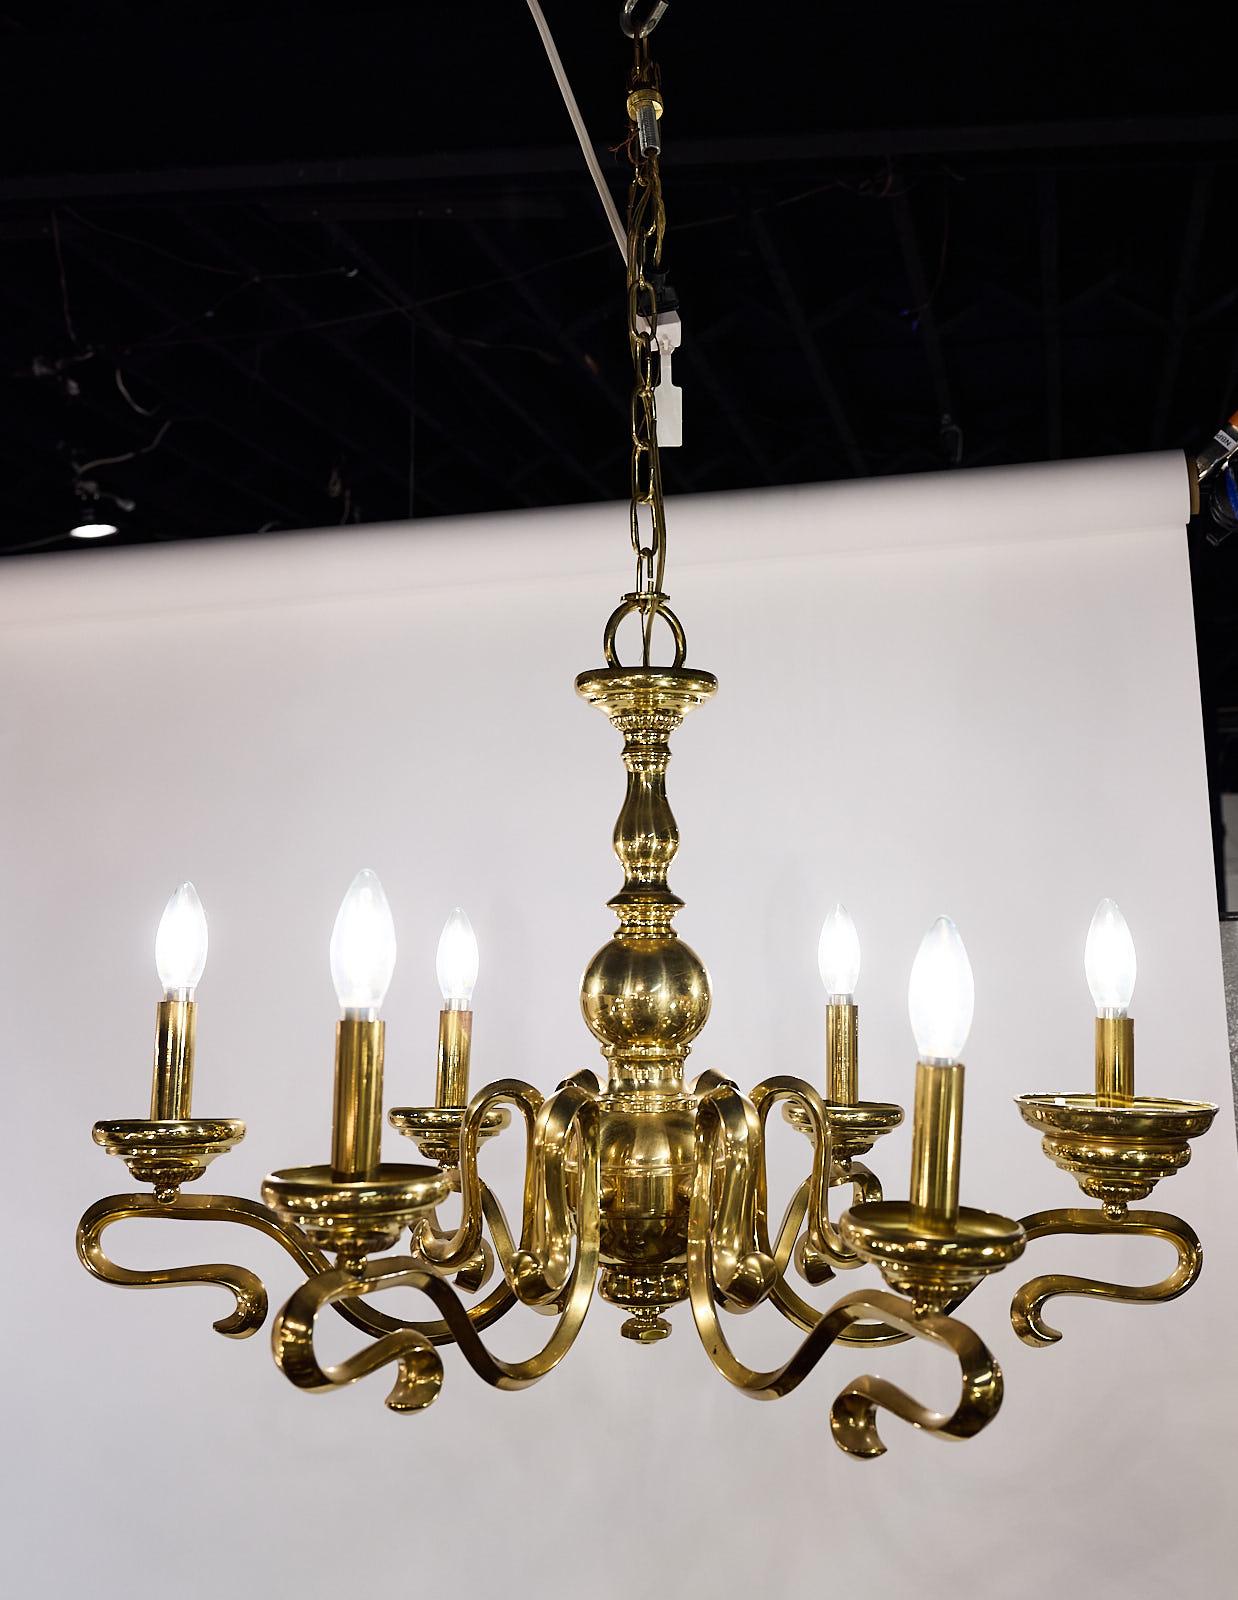 Spanish chandelier of brass having six arms that are traditional in overall form yet wonderfully baroque in style. Marked ‘Made in Spain’.  Circa 1950s. 

The chandelier measures 29” in diameter x 19” in height; the existing chain provides a 16”